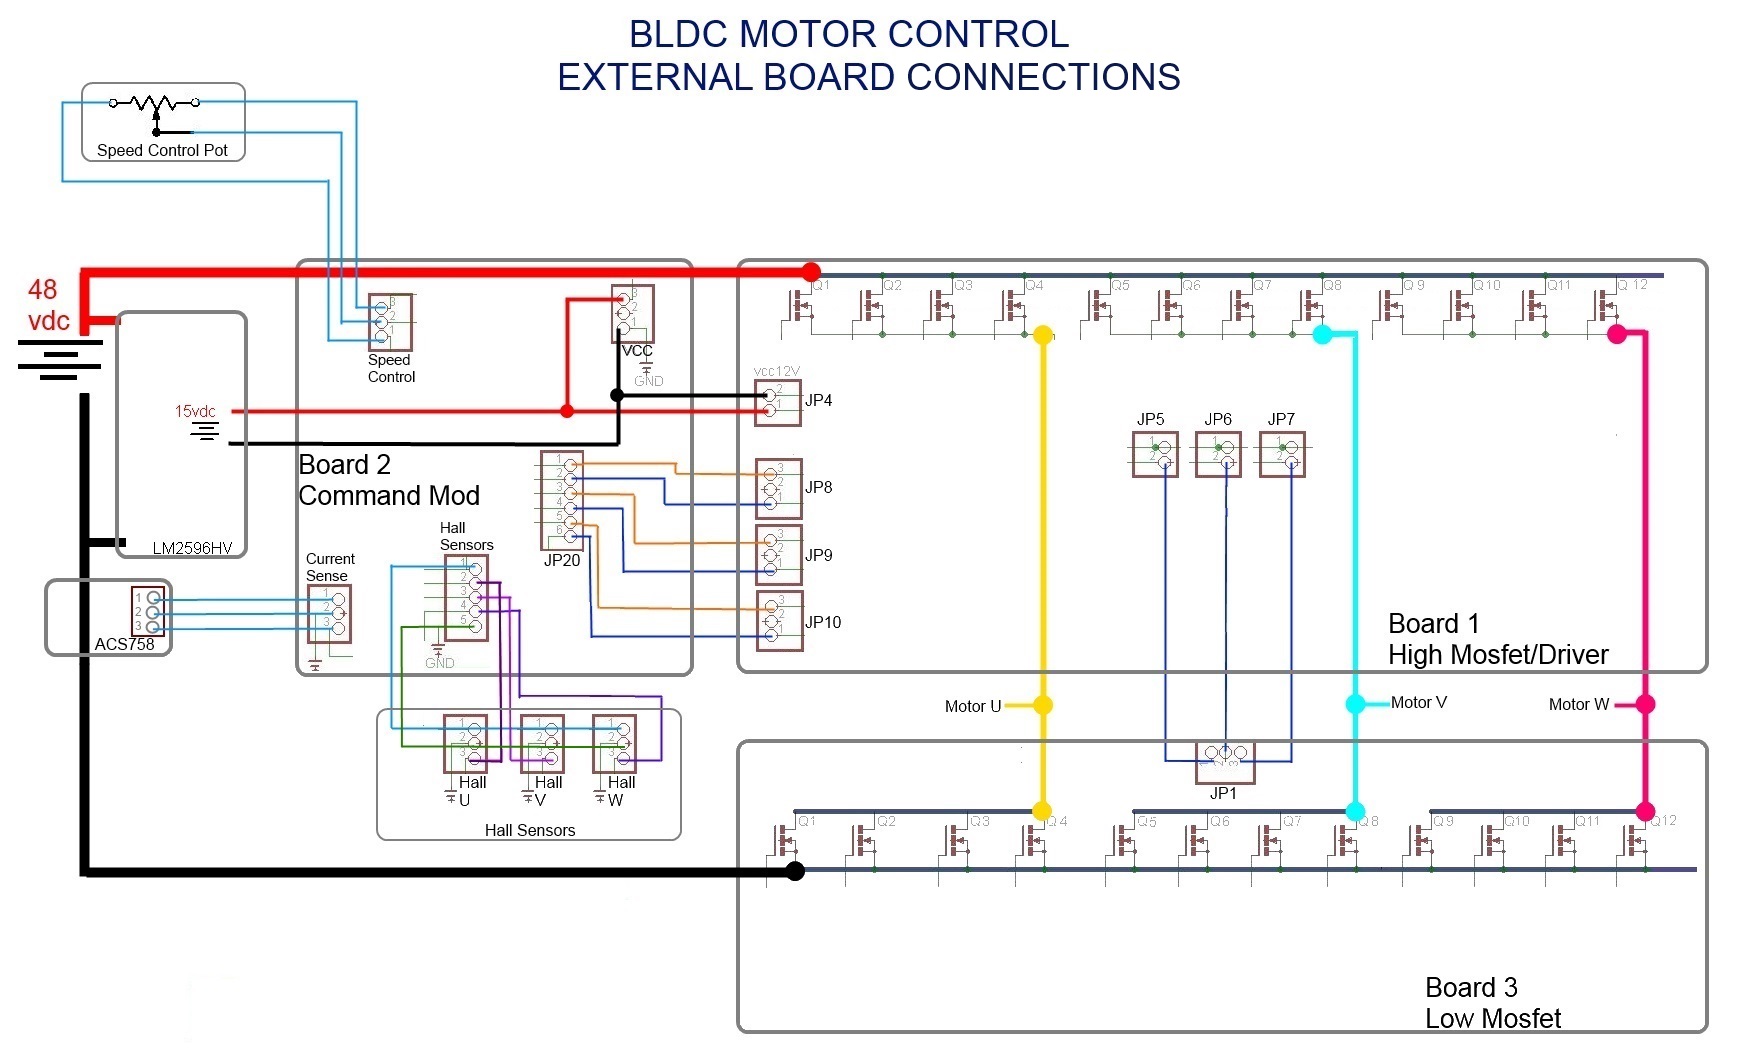 “3 phase brushless dc motor” “3 phase brushless dc motor ... power cable cat 5 wires diagram 